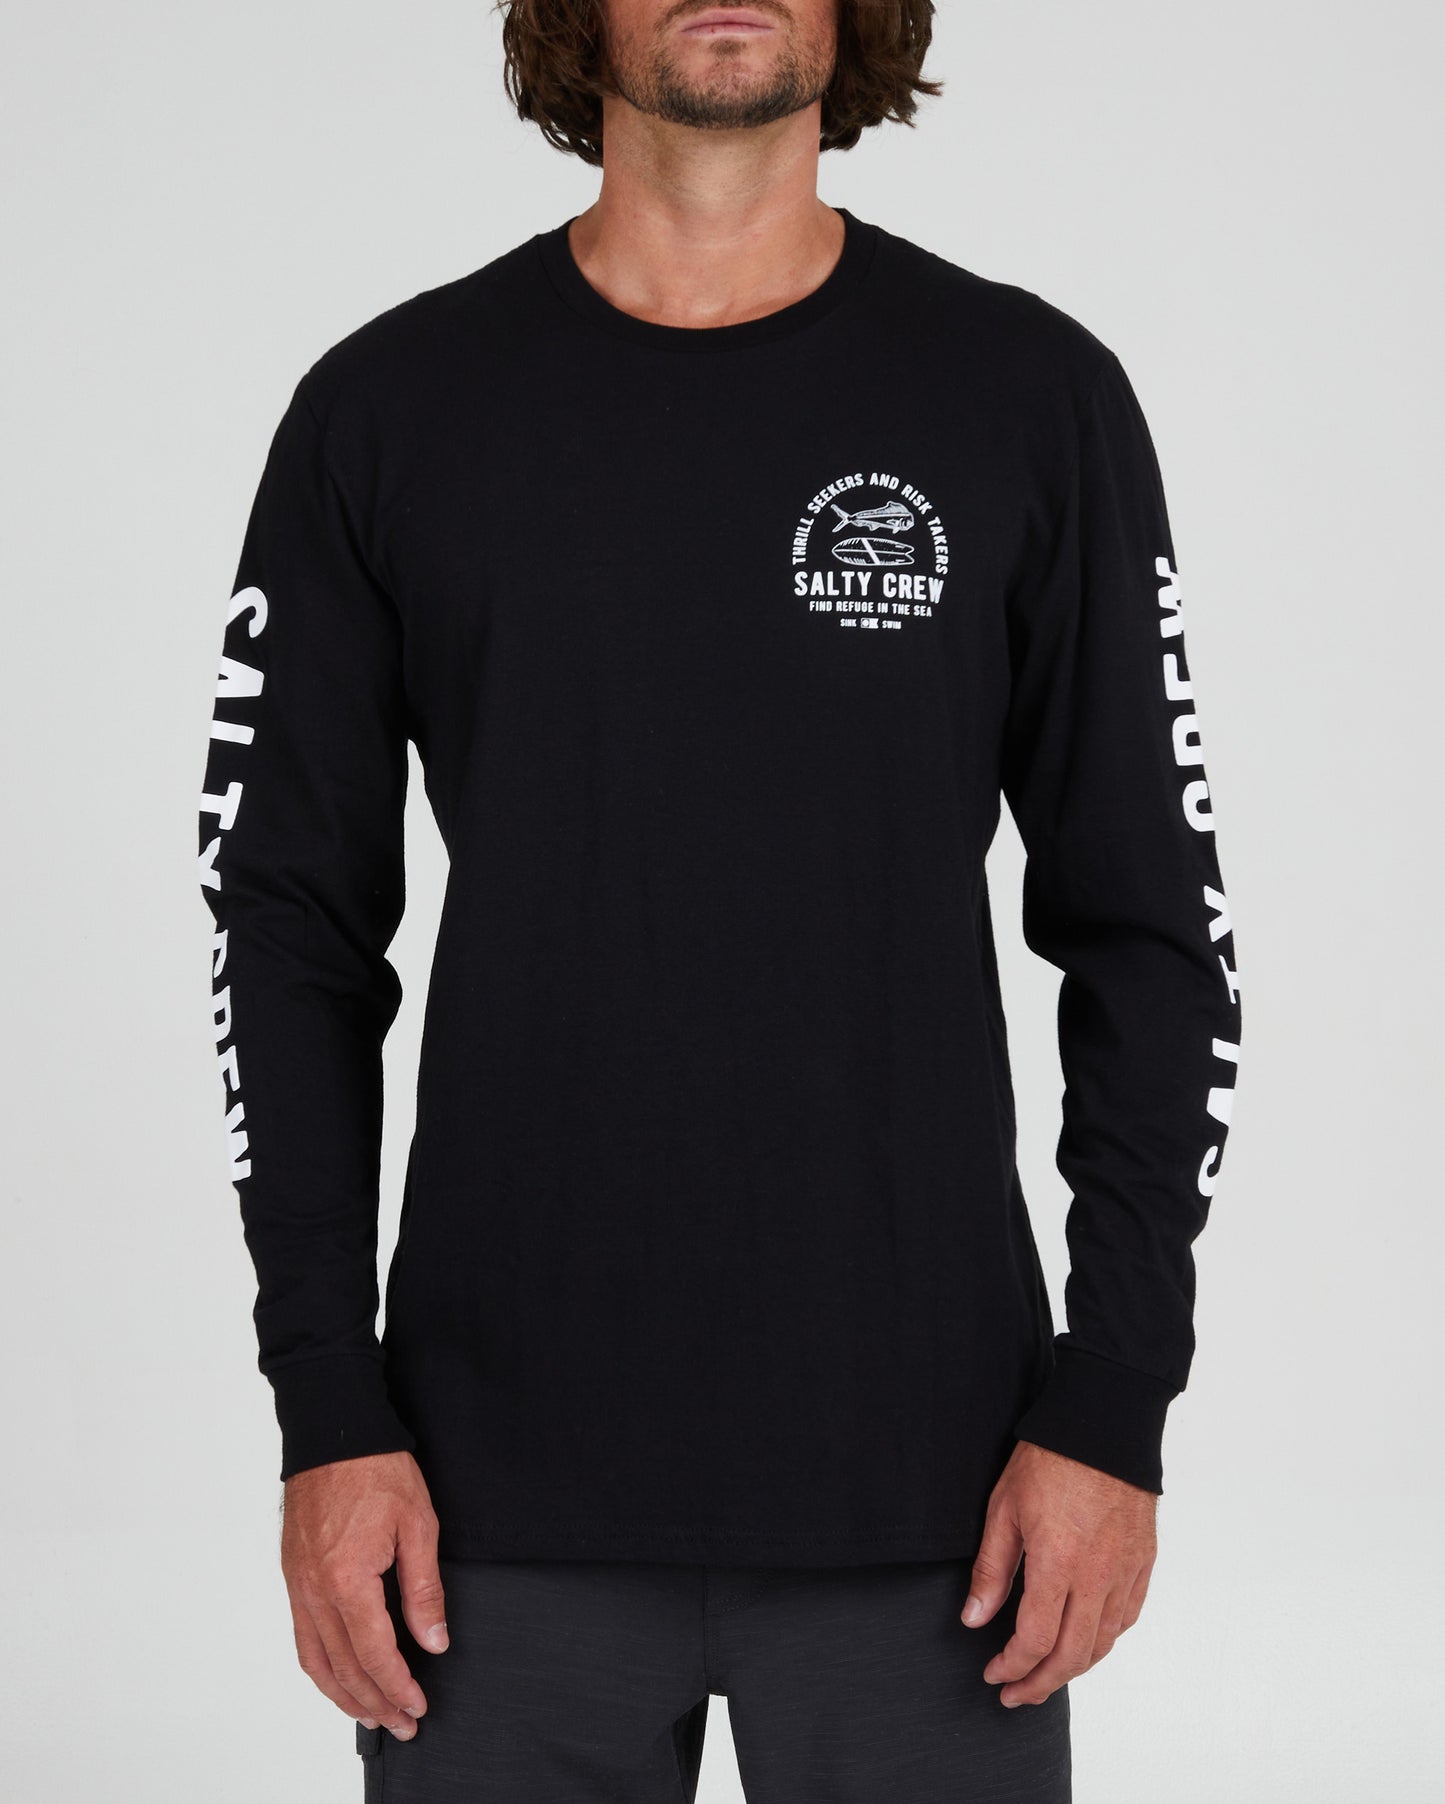 On body front of the Lateral Line Black L/S Standard Tee